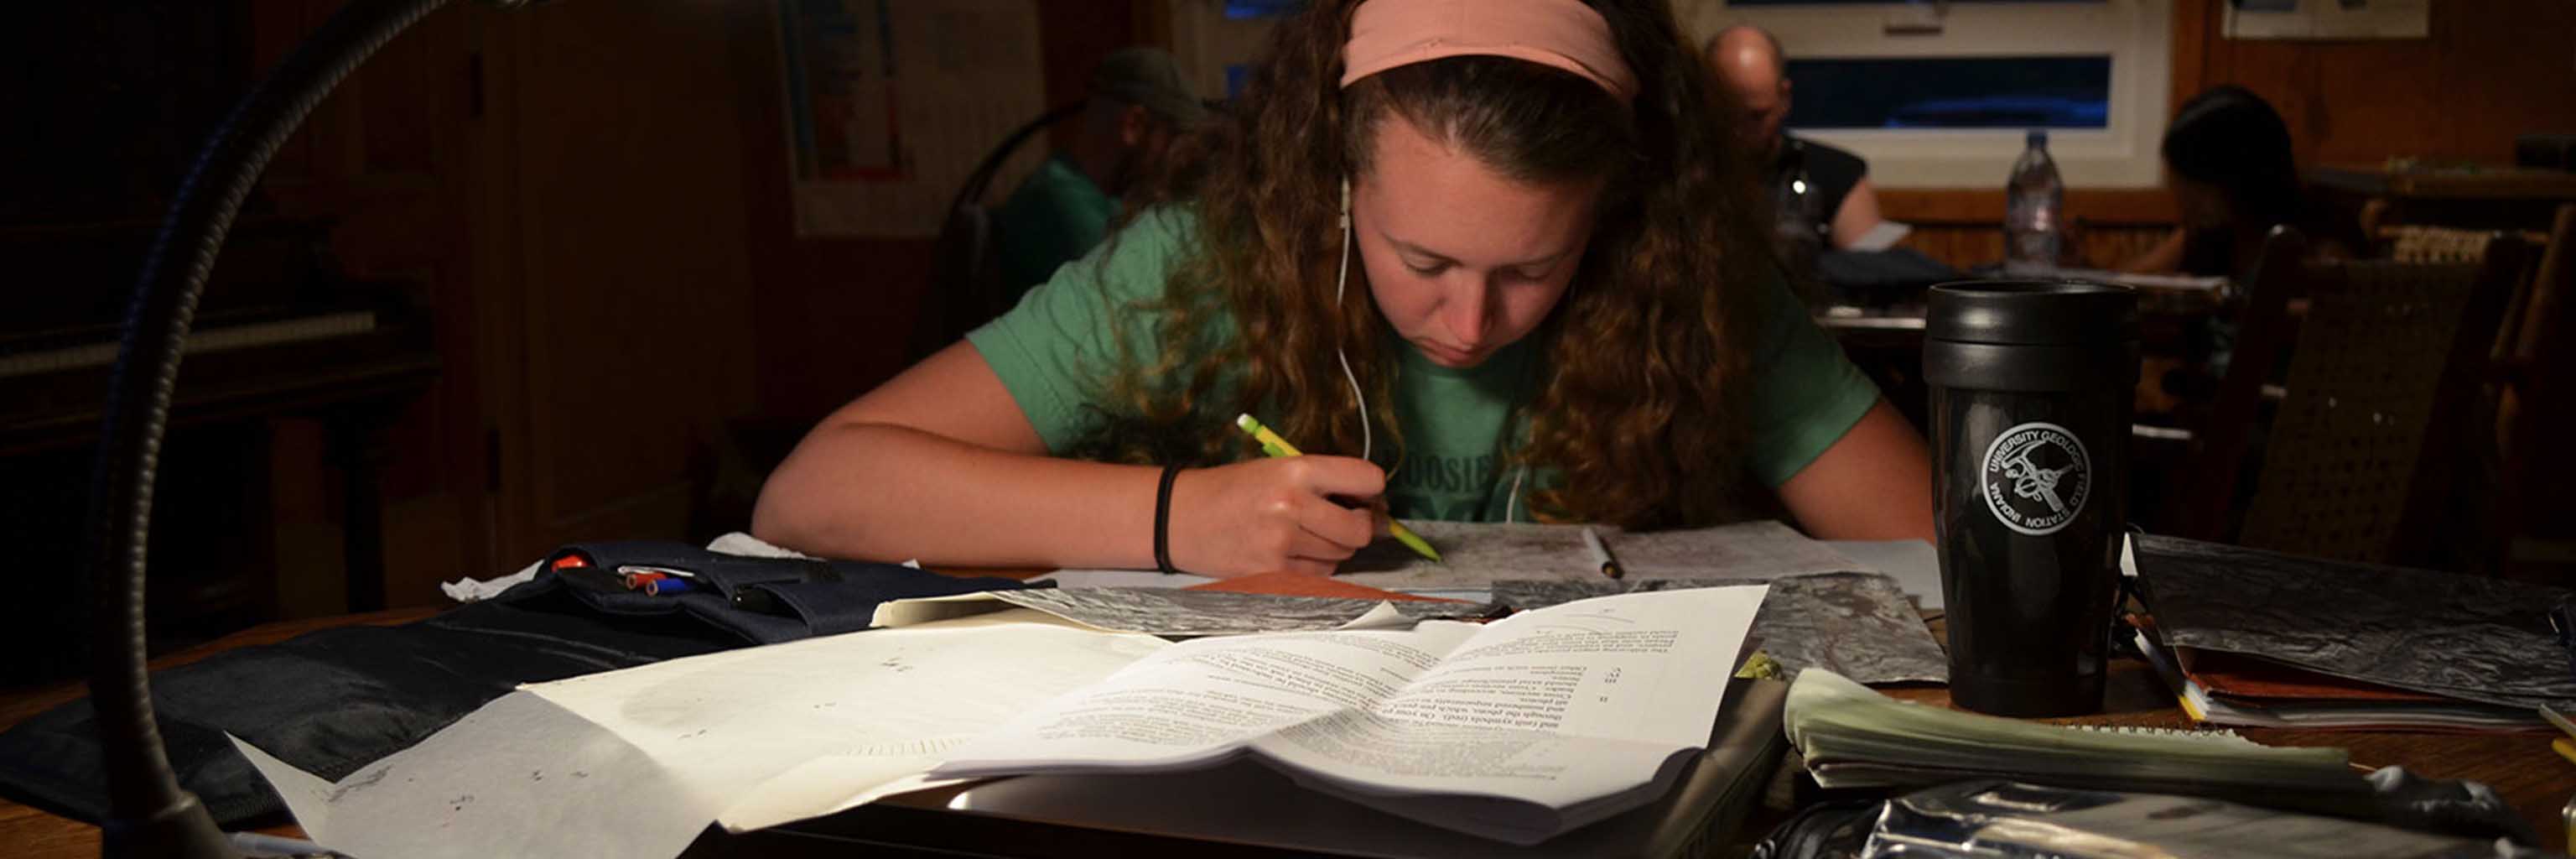 female student with headphones studying